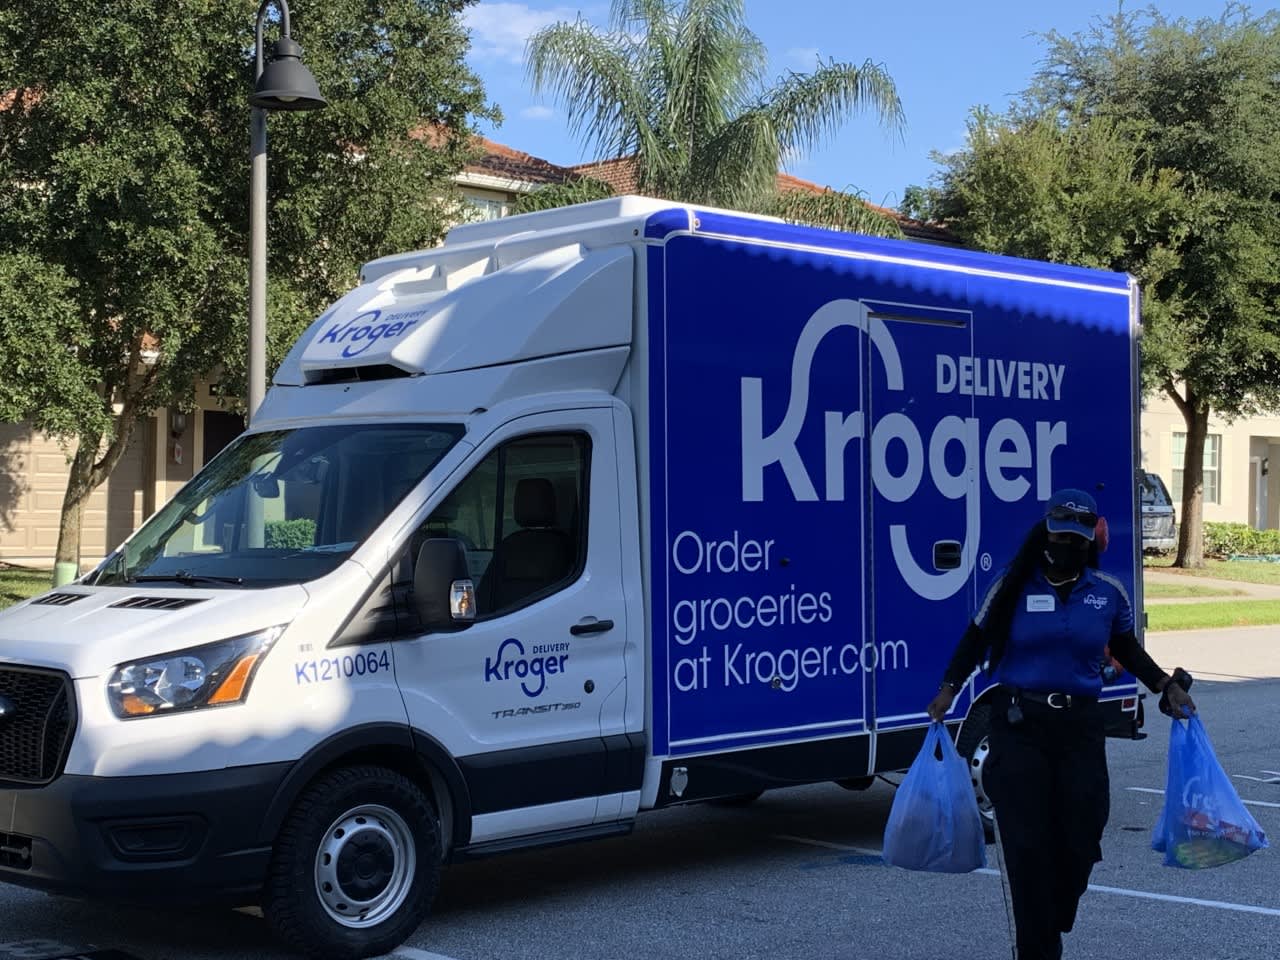 Kroger is taking on Publix in Florida without opening a single grocery store